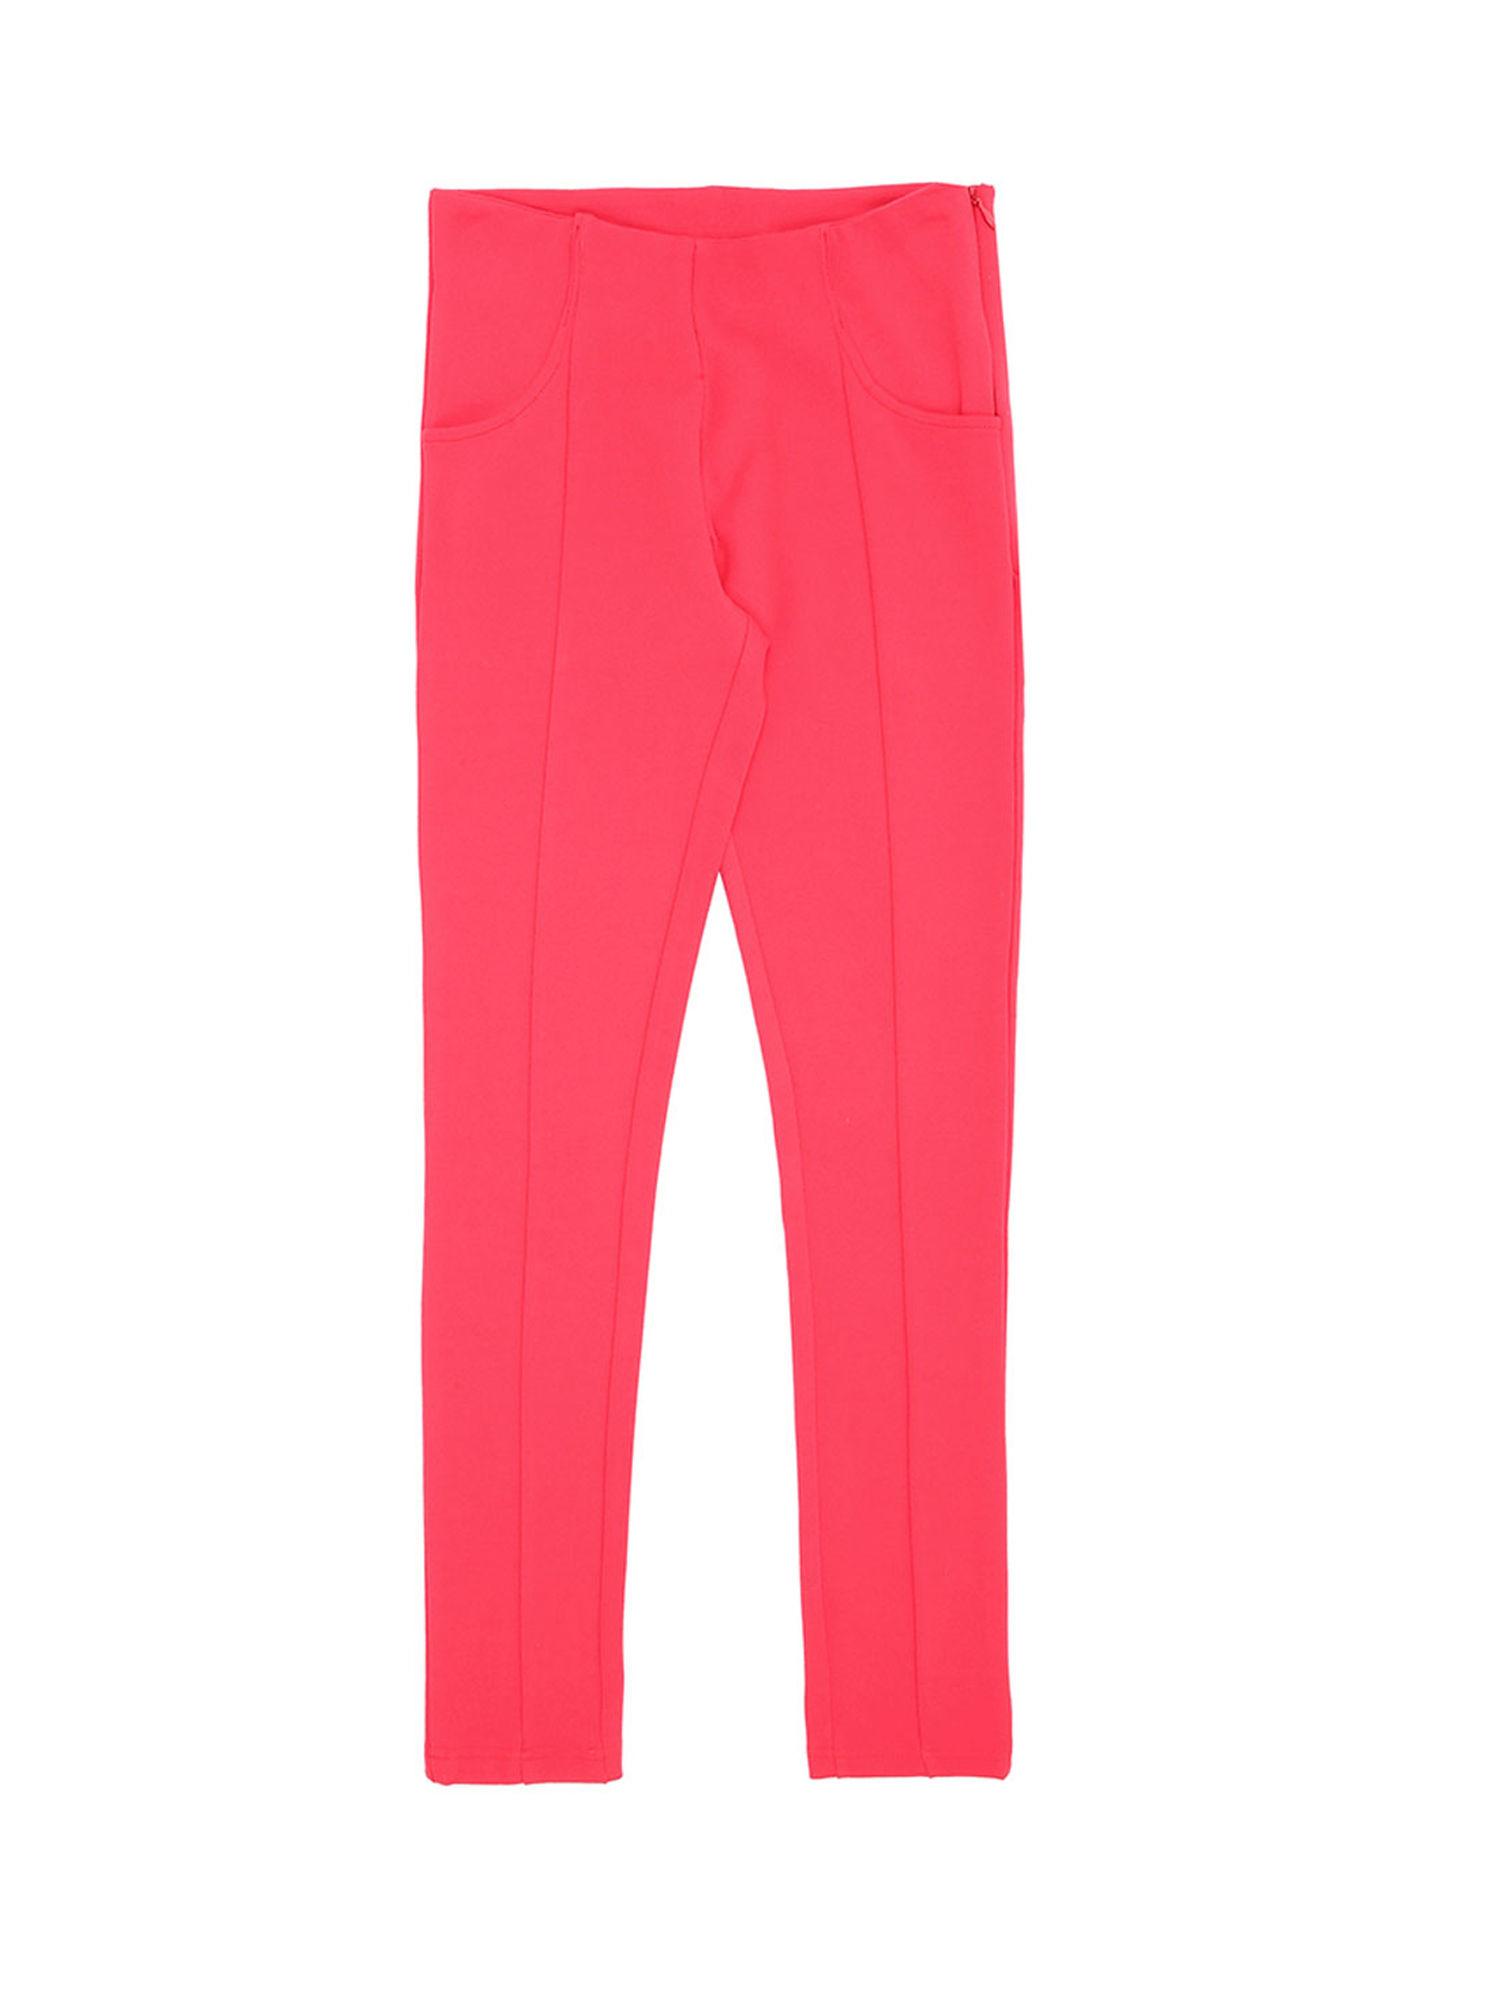 pink skinny fit trouser